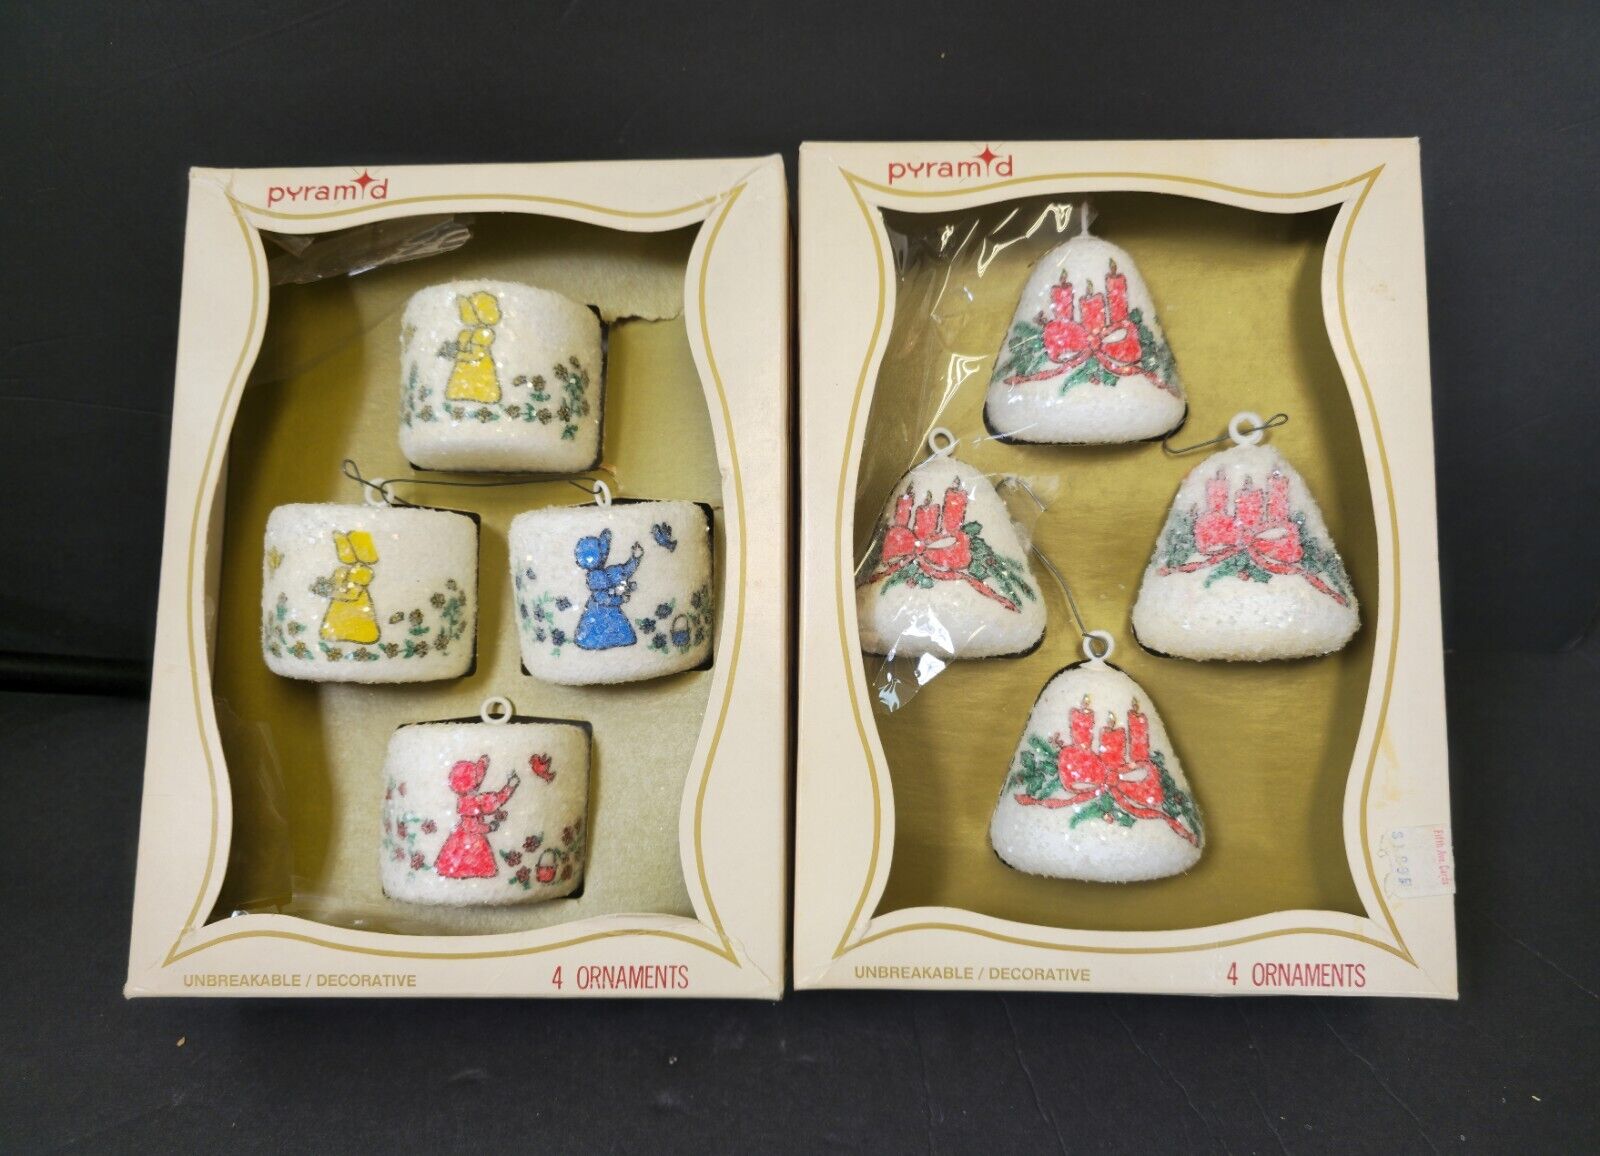 VINTAGE - Sugar Sparkle Frosted - Holly Hobbie  Pyramid Holly And Bows Ornaments